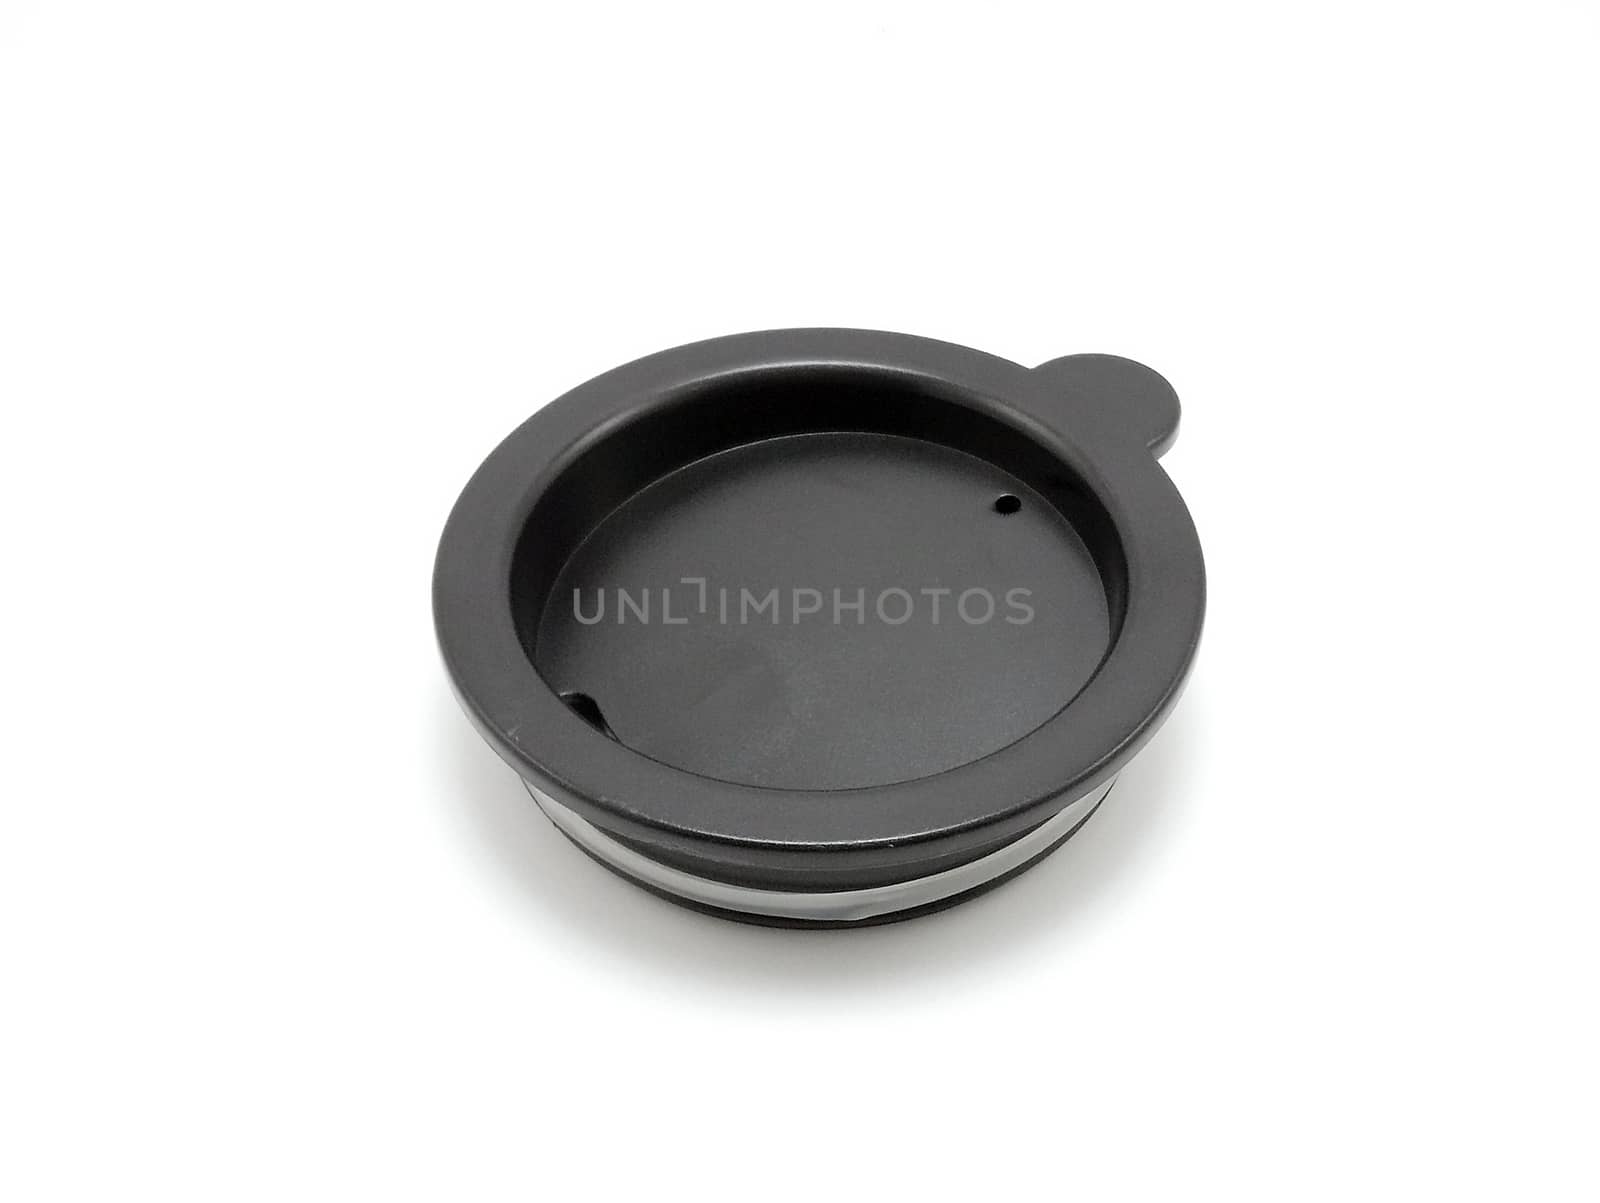 Self stirring mug black lid use to cover the top of mug while not in use